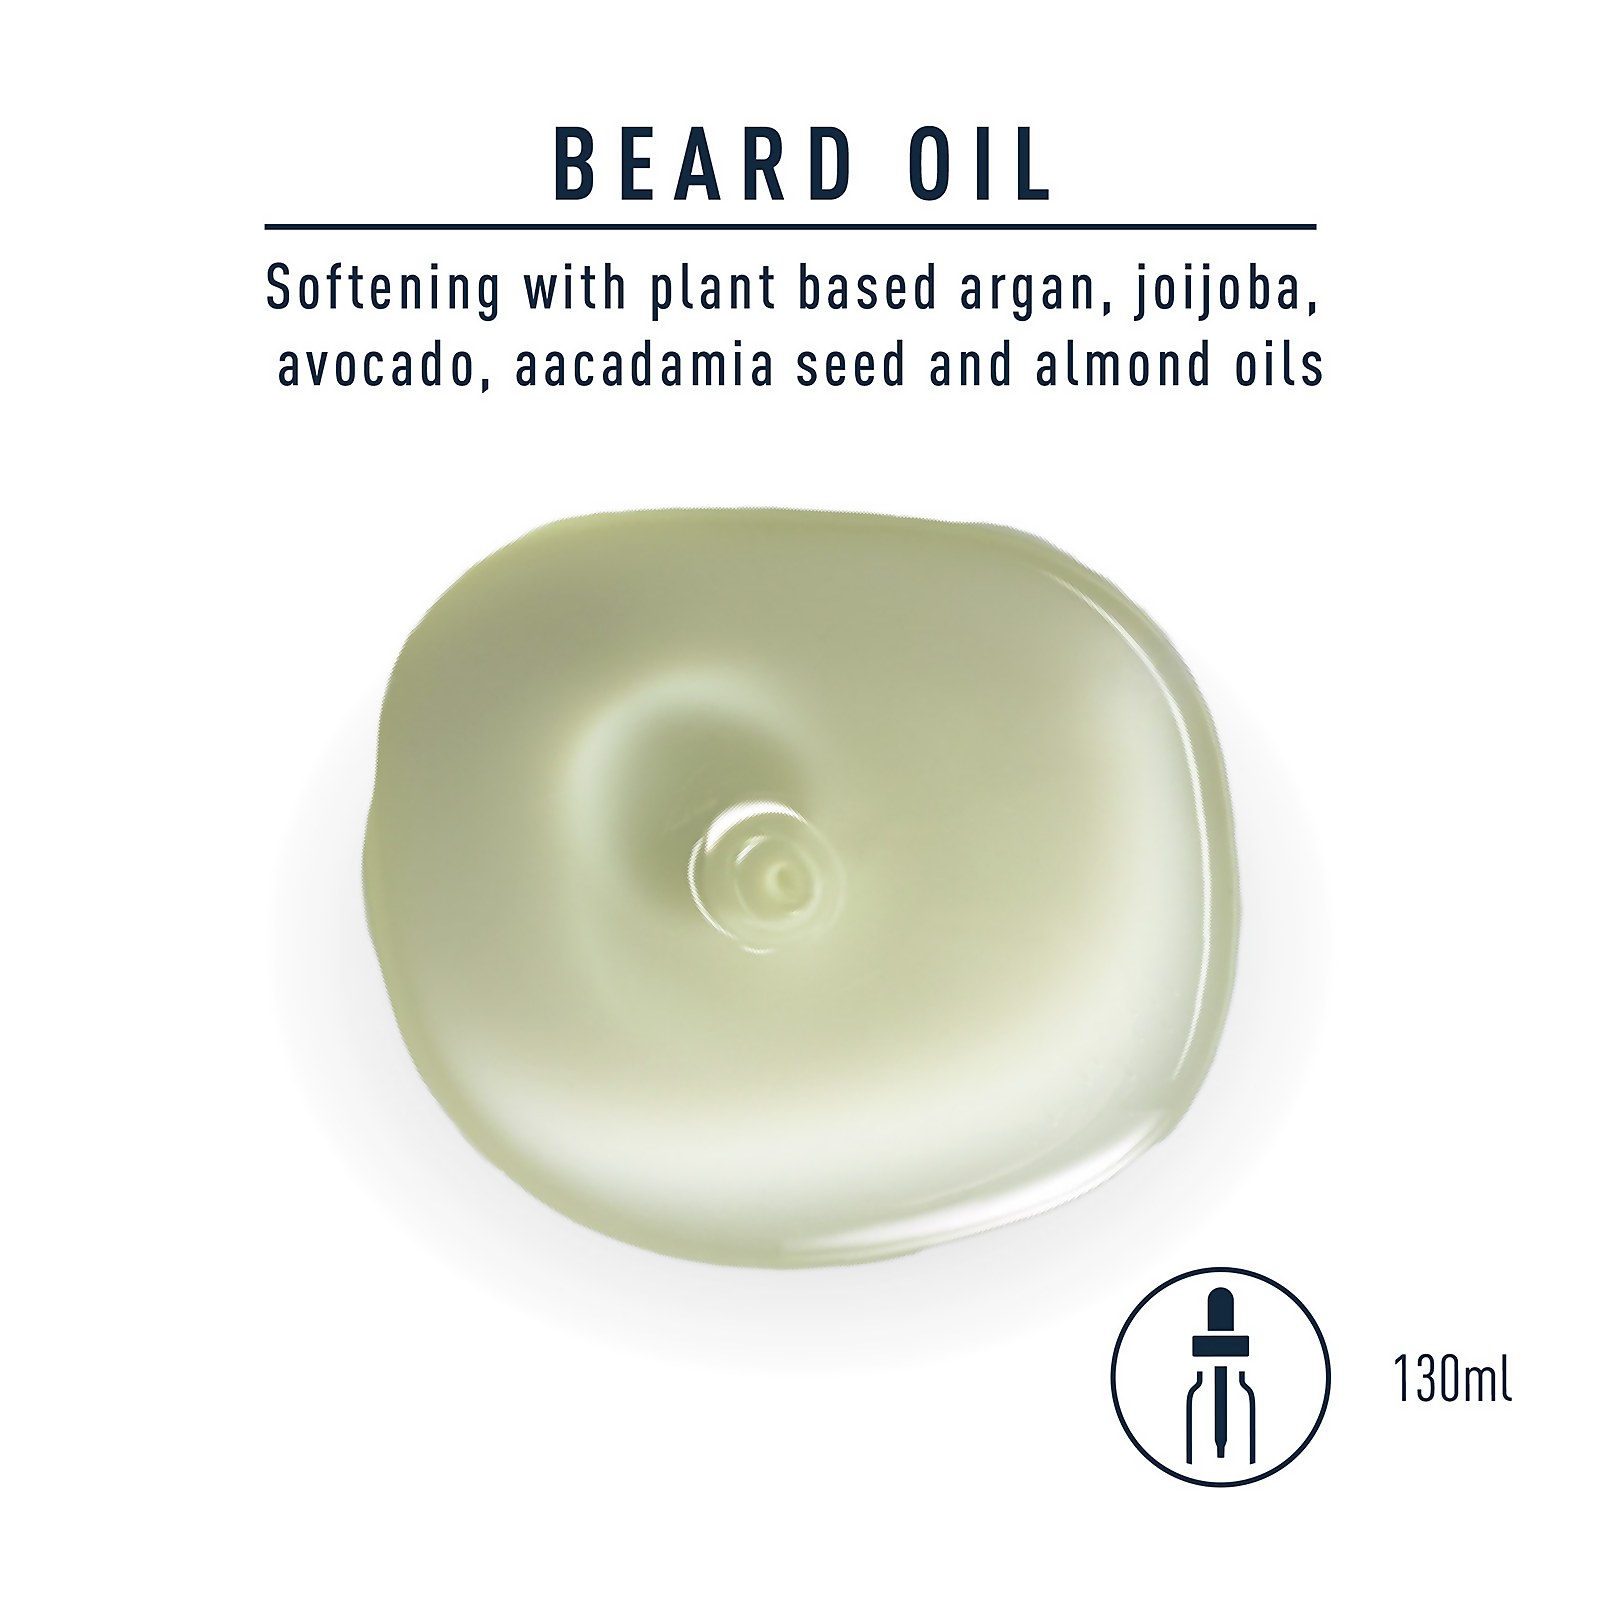 BEARD OIL Softening with plant based argan, joijoba, avocado, aacadamia seed and almond oils
                          130ml